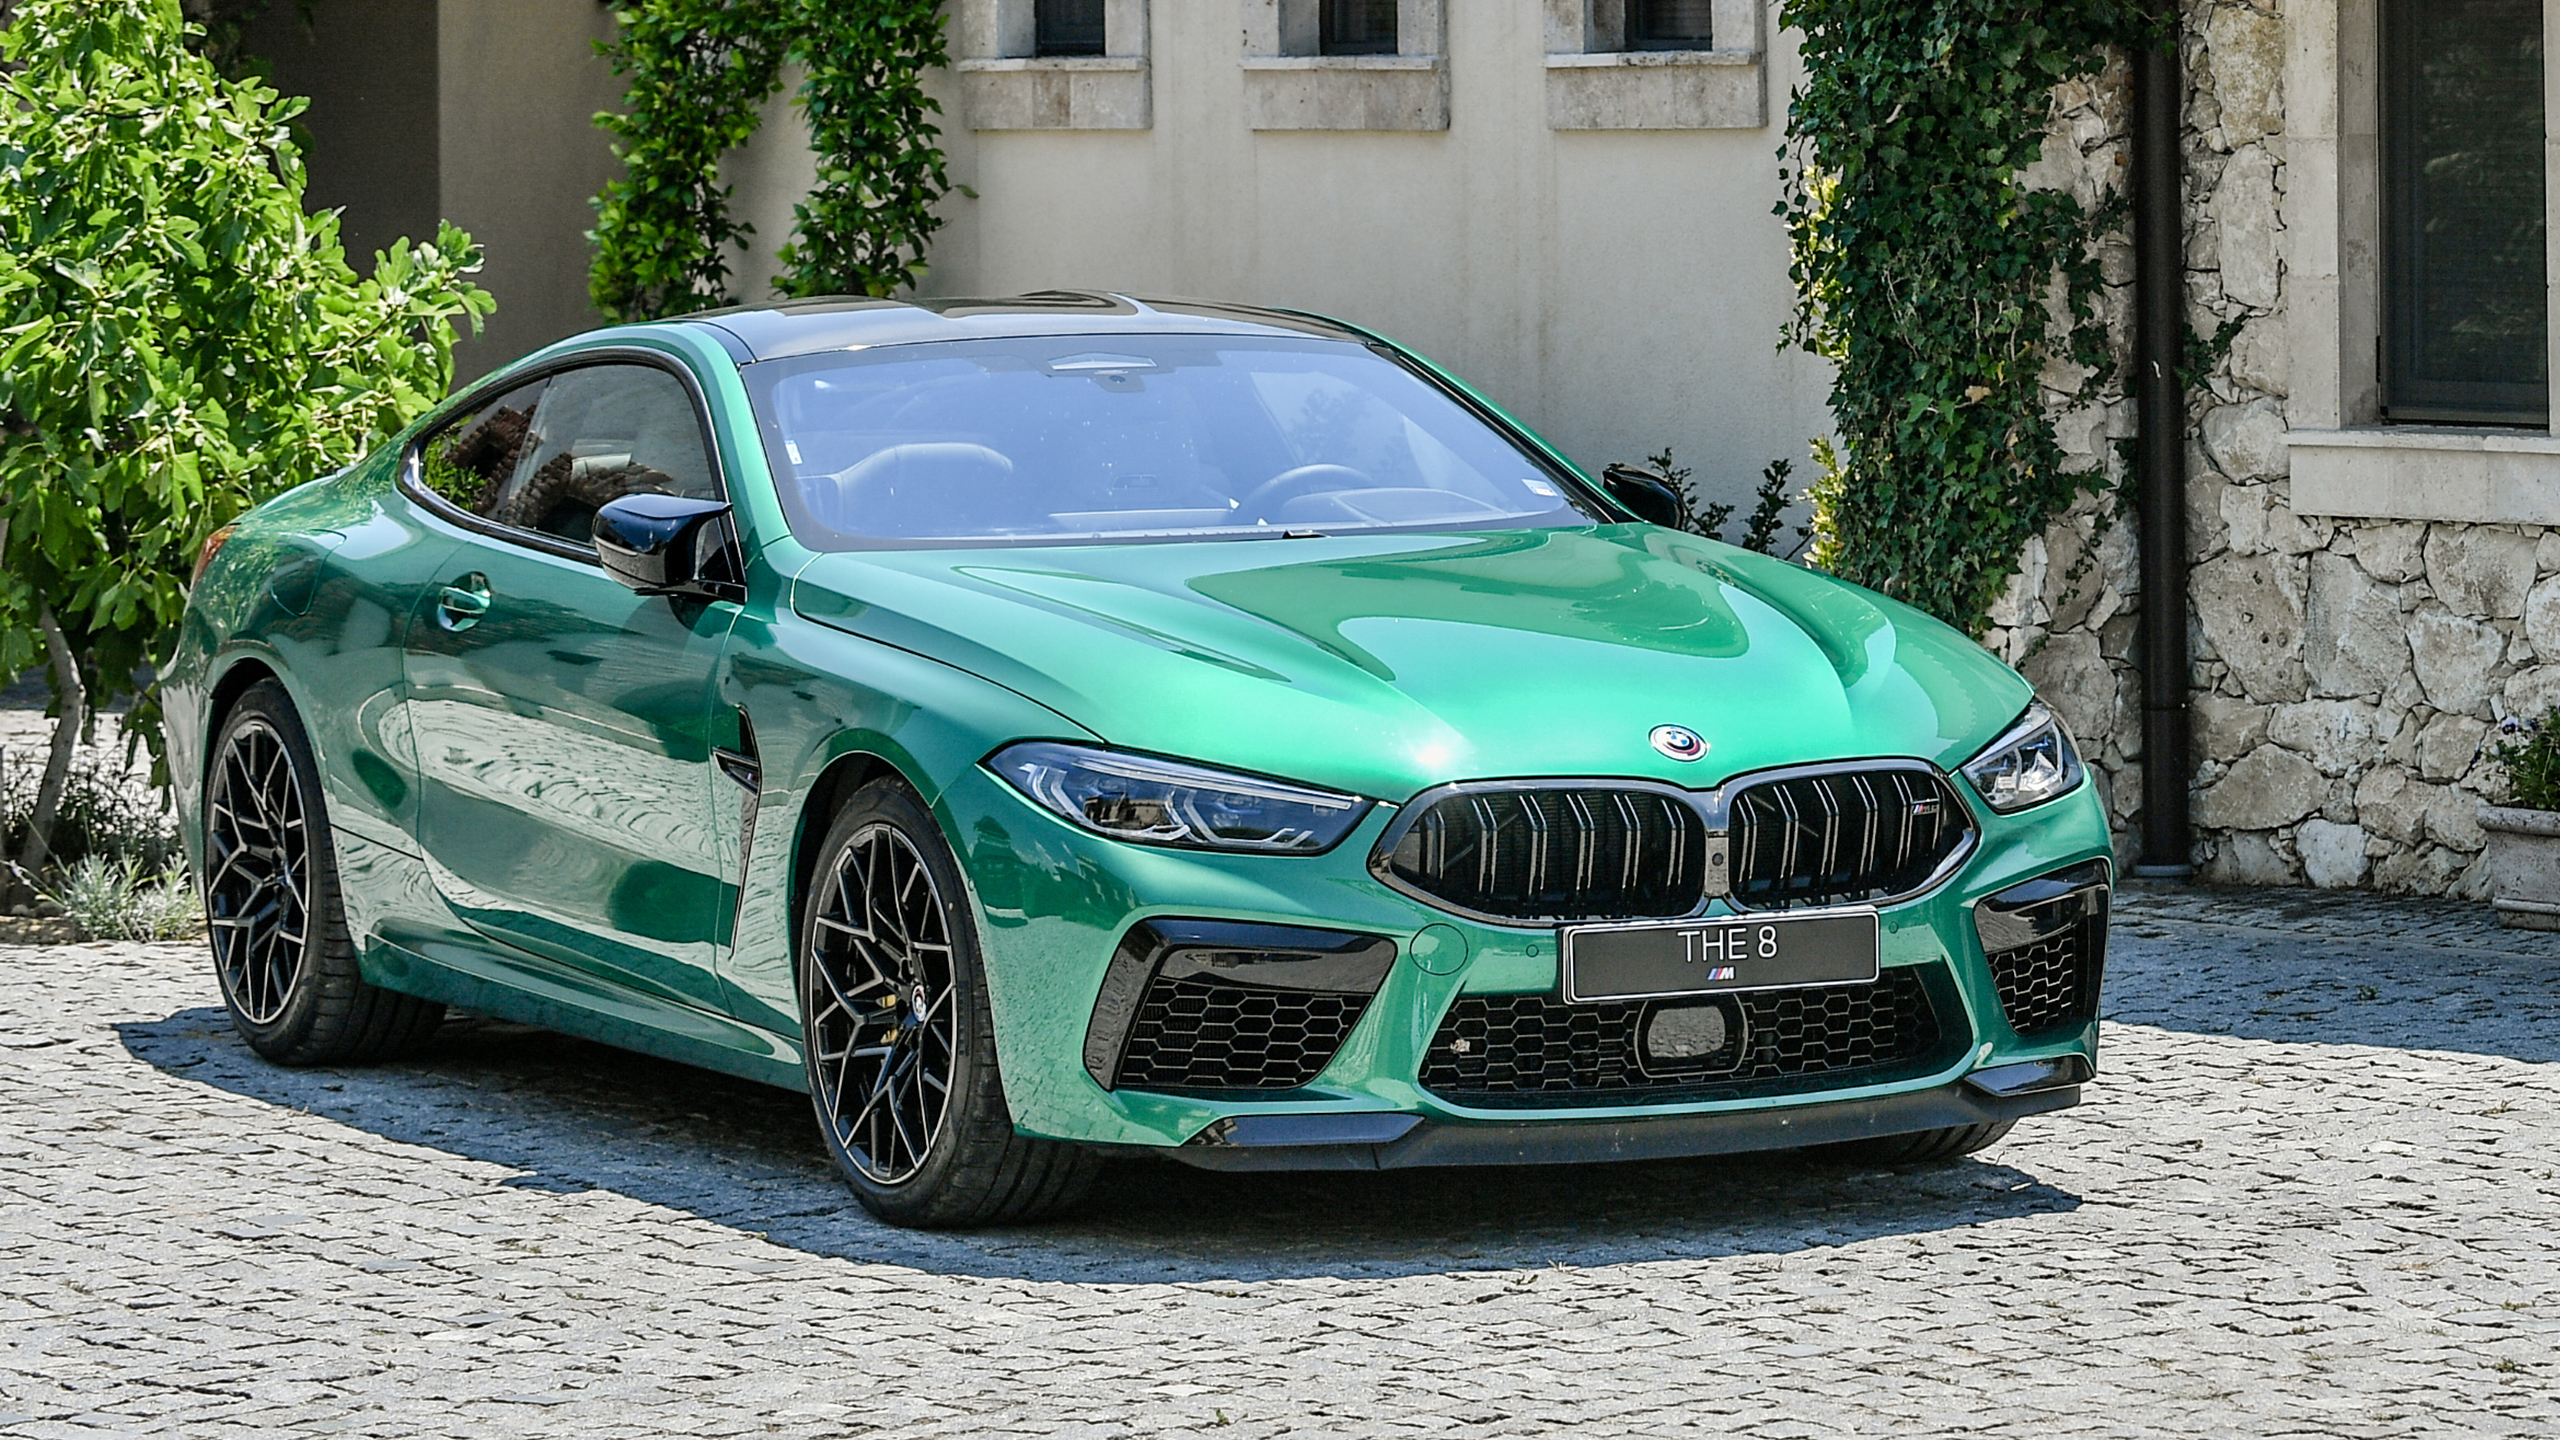 Bmw m 8 competition. BMW m8 Gran Coupe 2022. BMW m8 Competition Coupe 2022. BMW m8 Competition Gran Coupe 2022. BMW m8 2023.